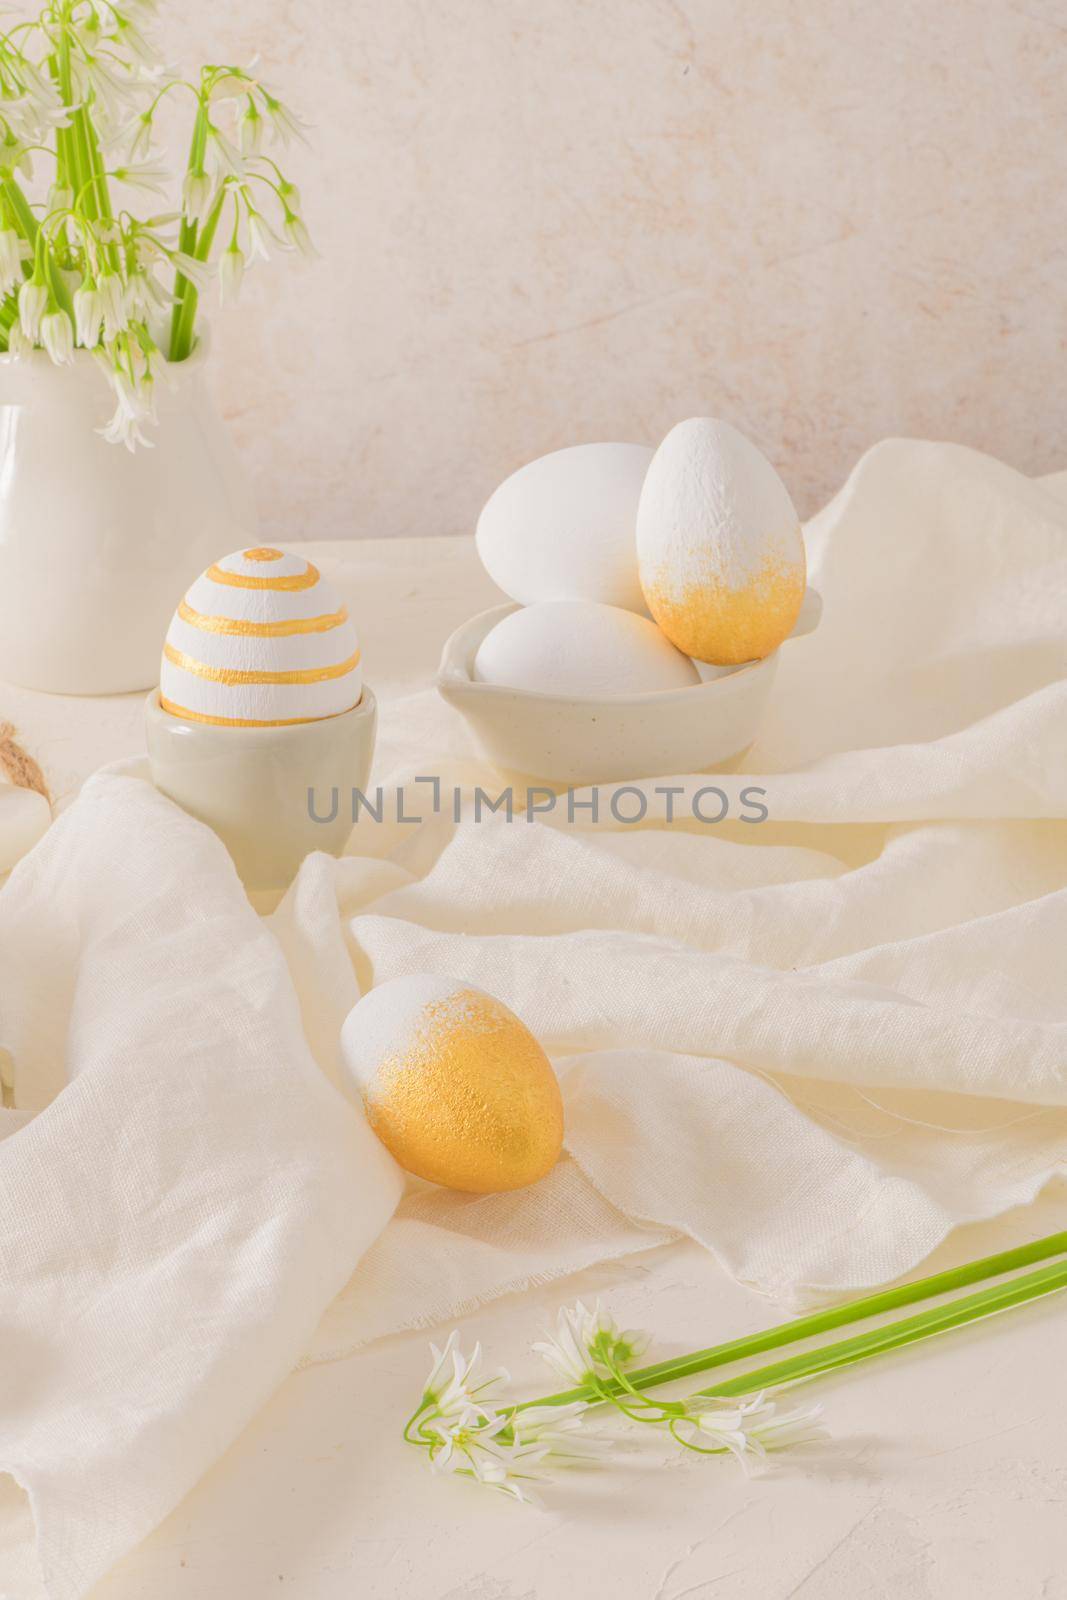 Close up of golden and white Easter eggs with white flower on bright white wooden table background.